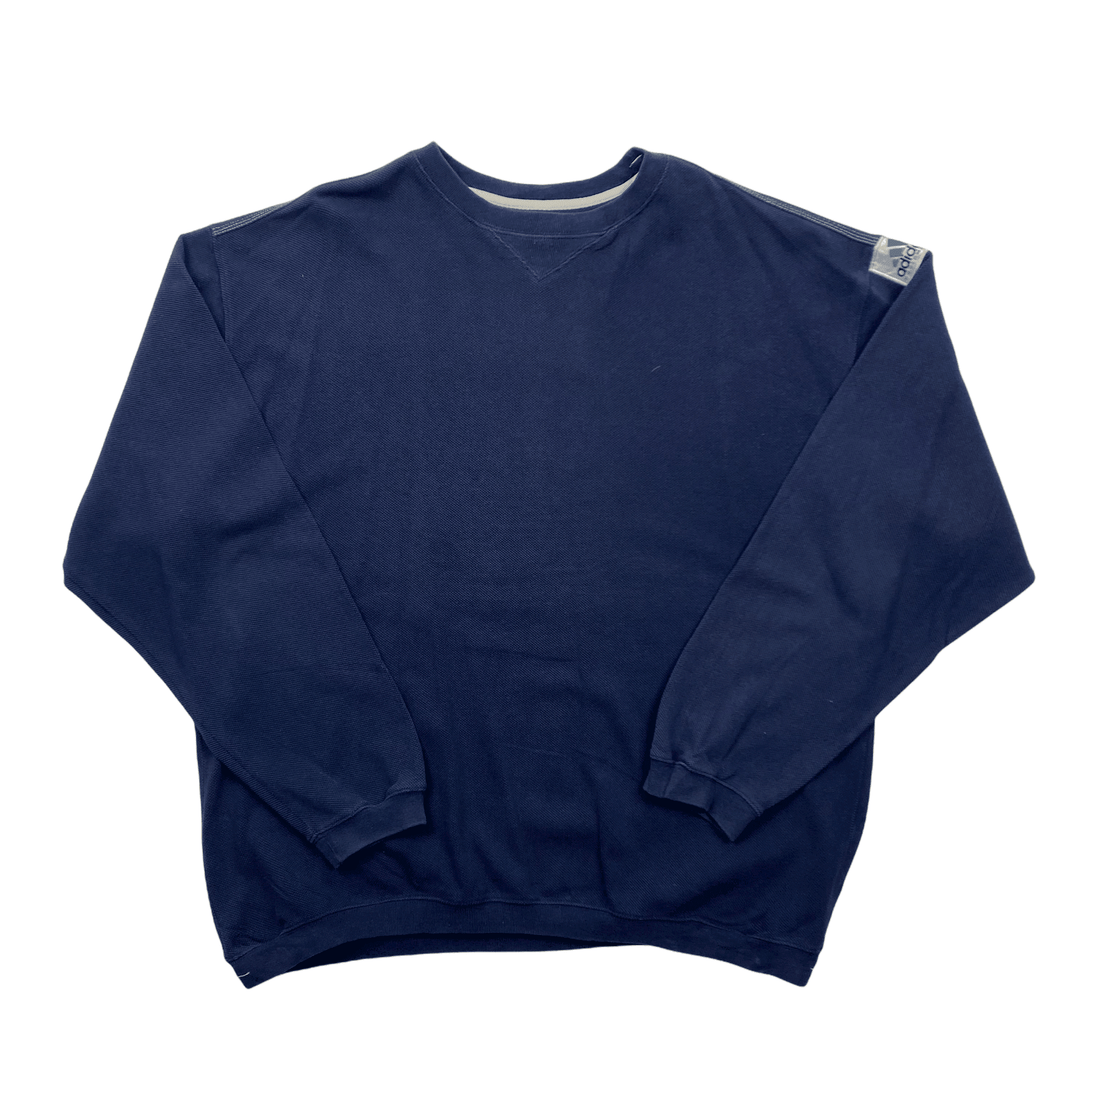 Vintage 90s Navy Blue Adidas Equipment Spell-Out Sweatshirt - Extra Large - The Streetwear Studio